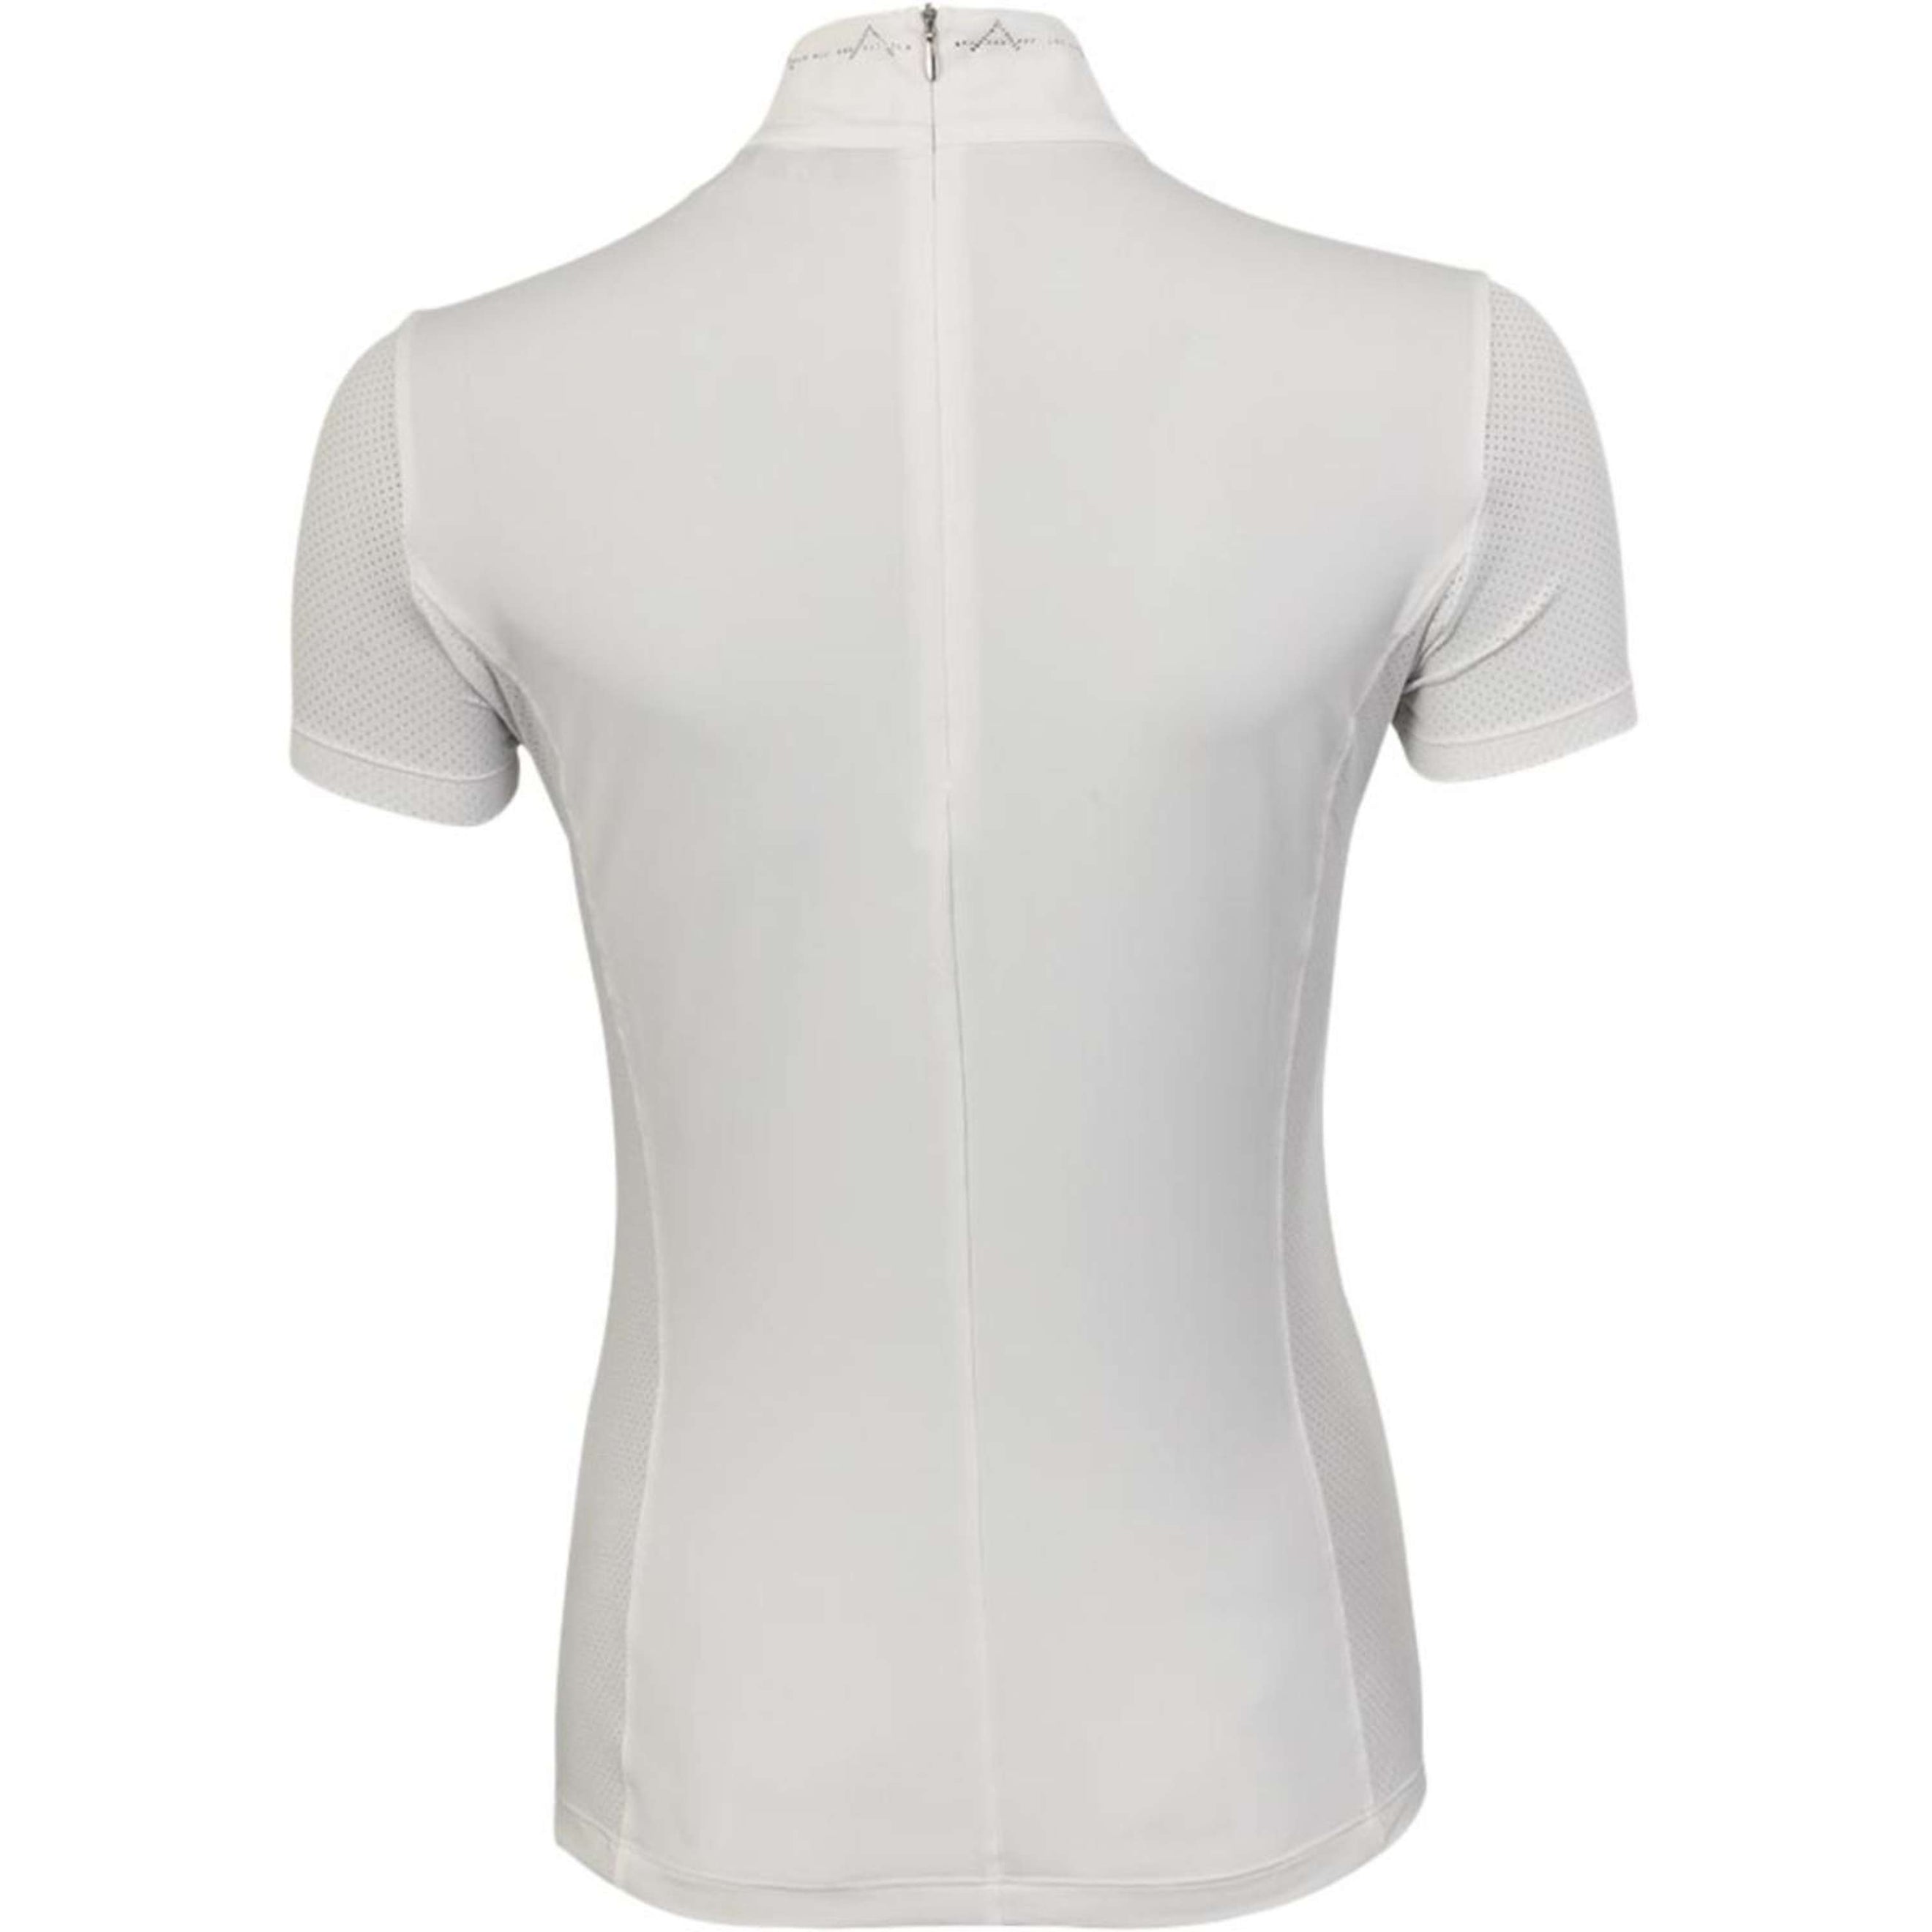 ANKY Chemise Exposure C-wear Manches Courtes Blanc